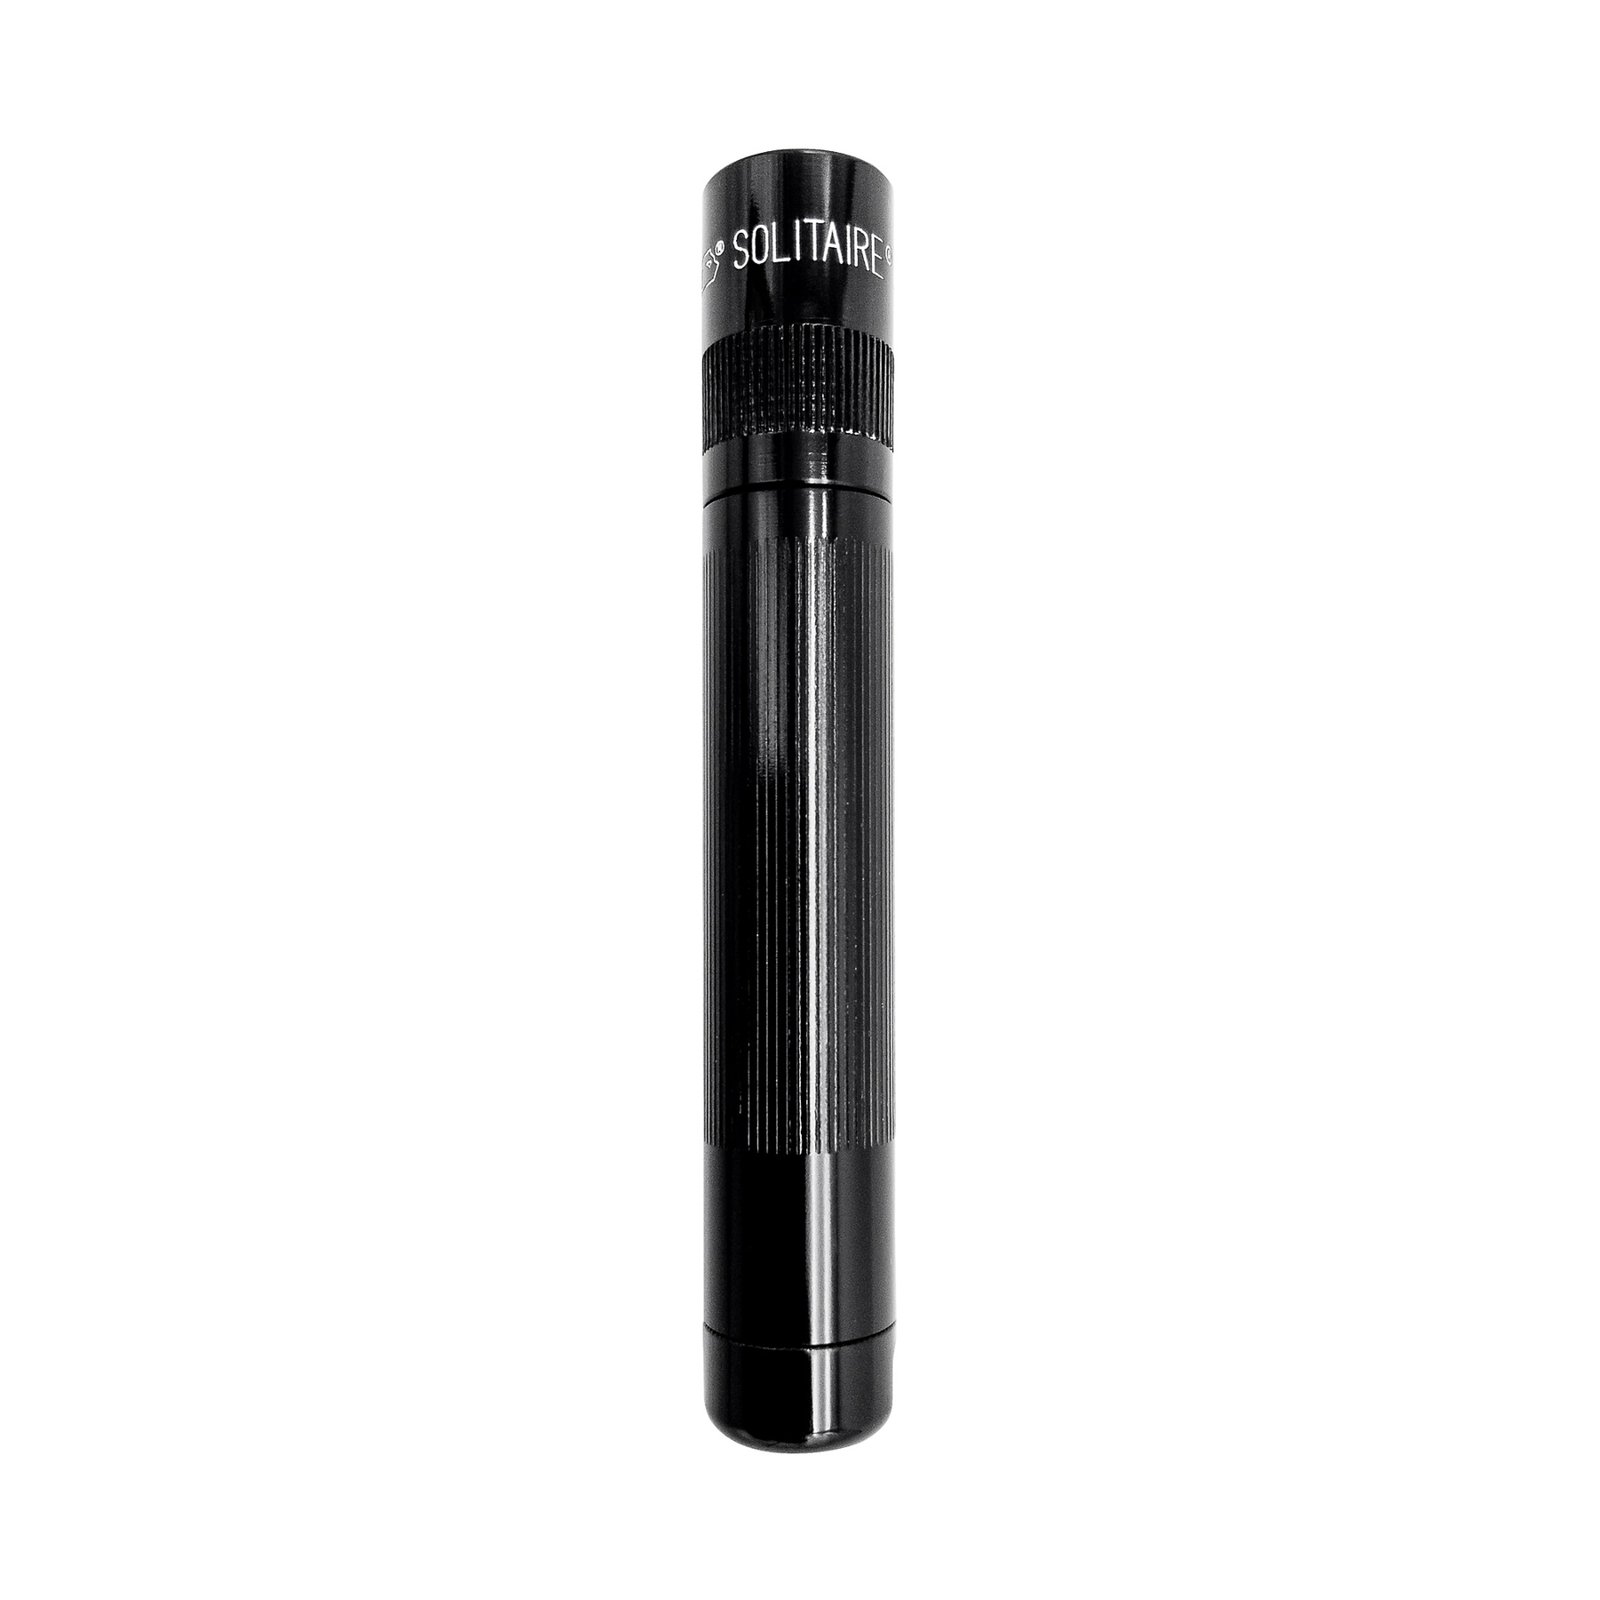 Maglite LED-Taschenlampe Solitaire, 1-Cell AAA, Box, schwarz